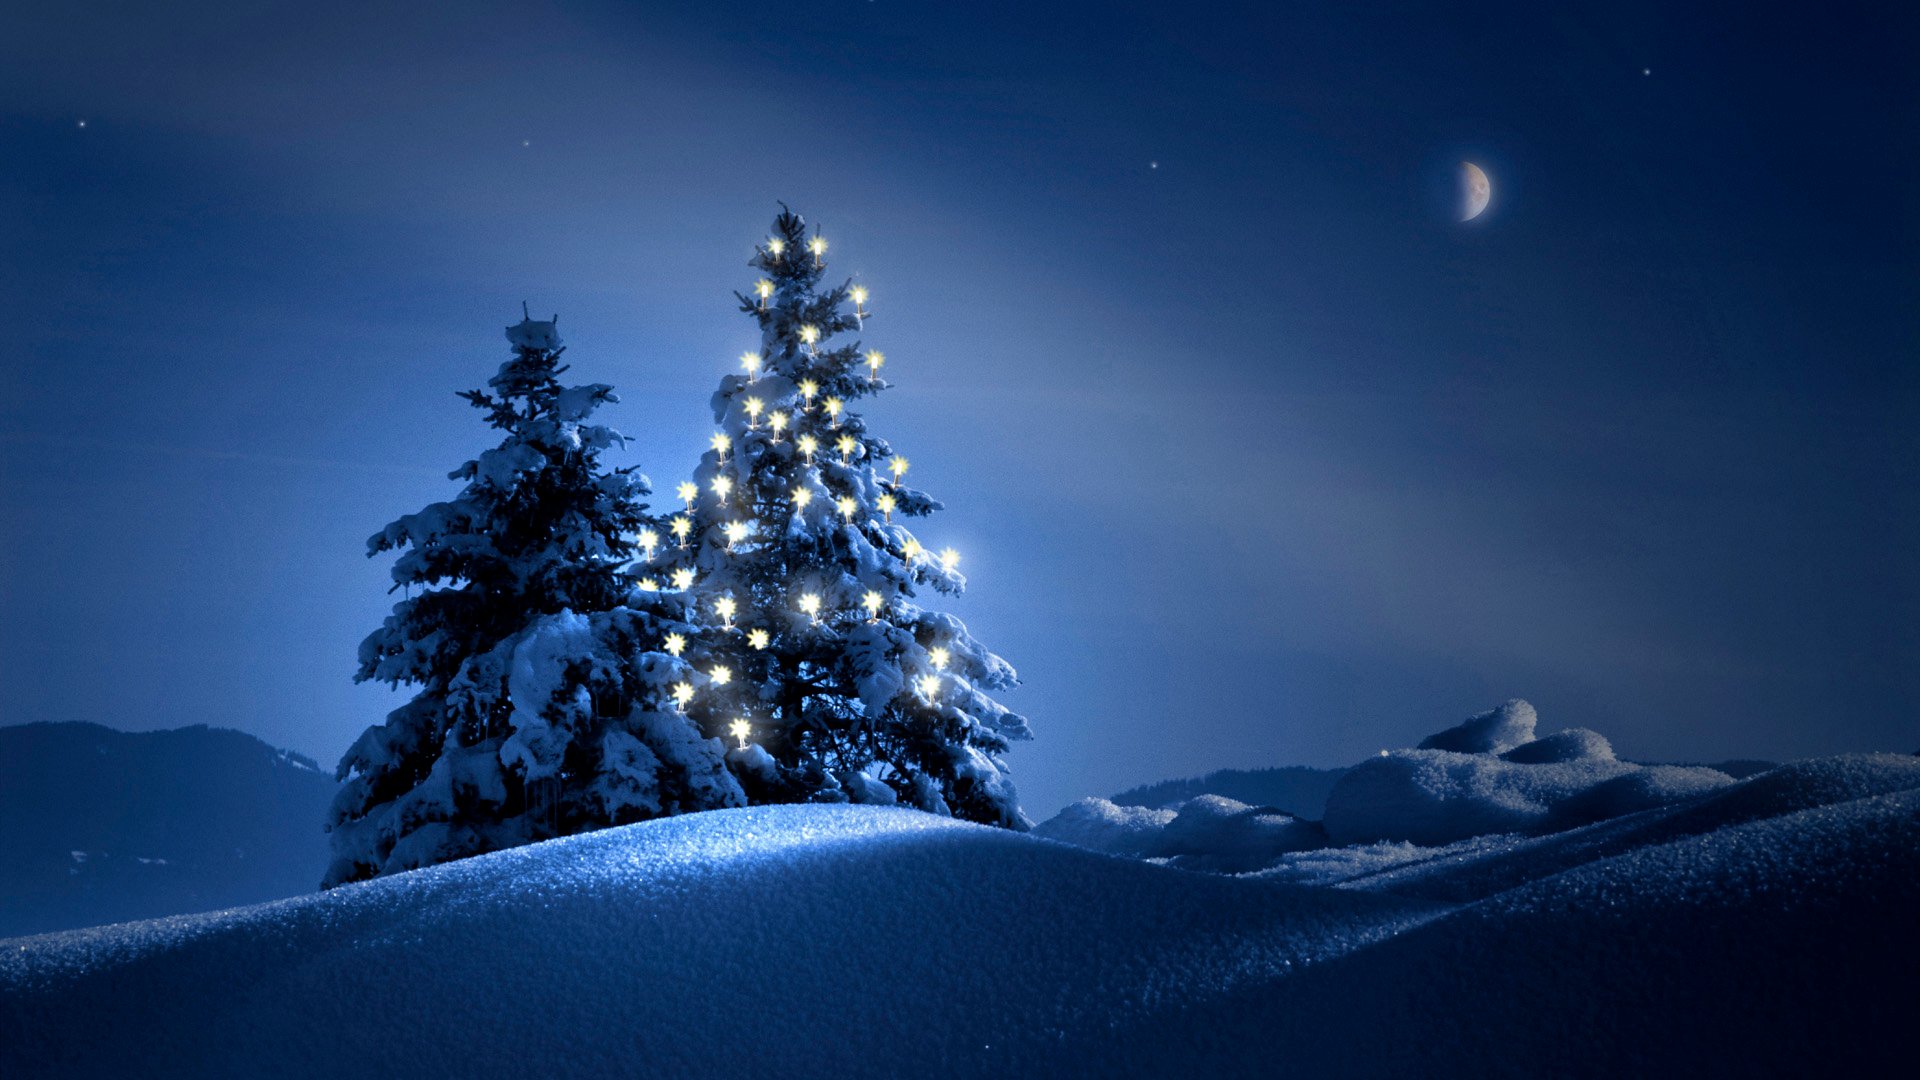 download winter scenes wallpaper free which is under the winter